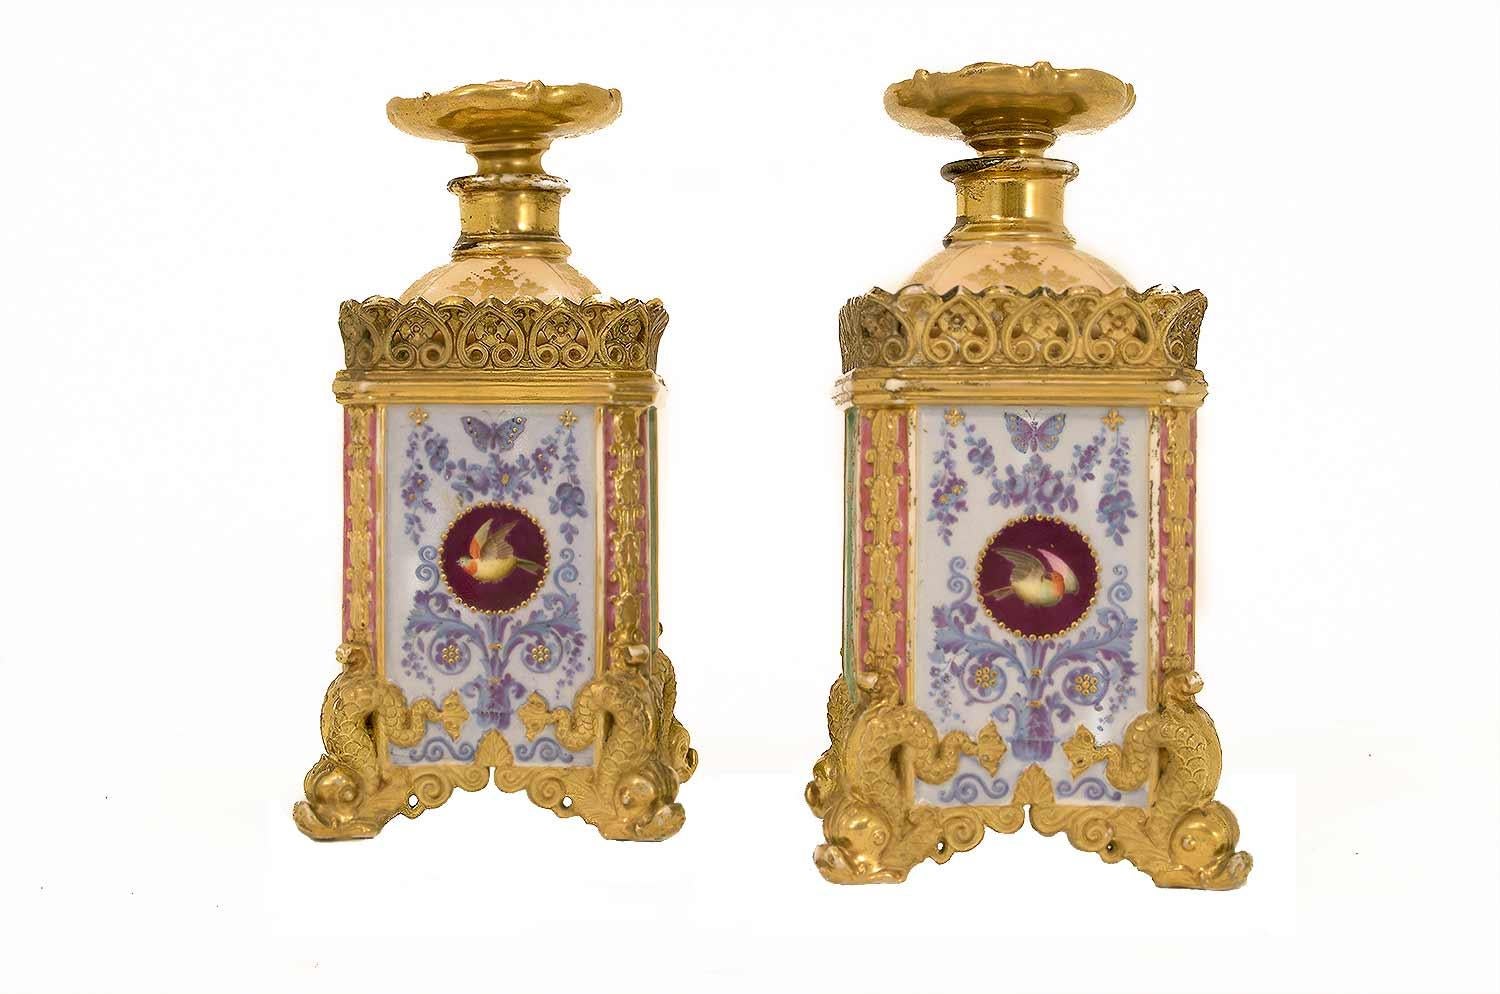 French Jacob Petit, Pair of Flasks with Canted Corners in Enameled Porcelain, 1840